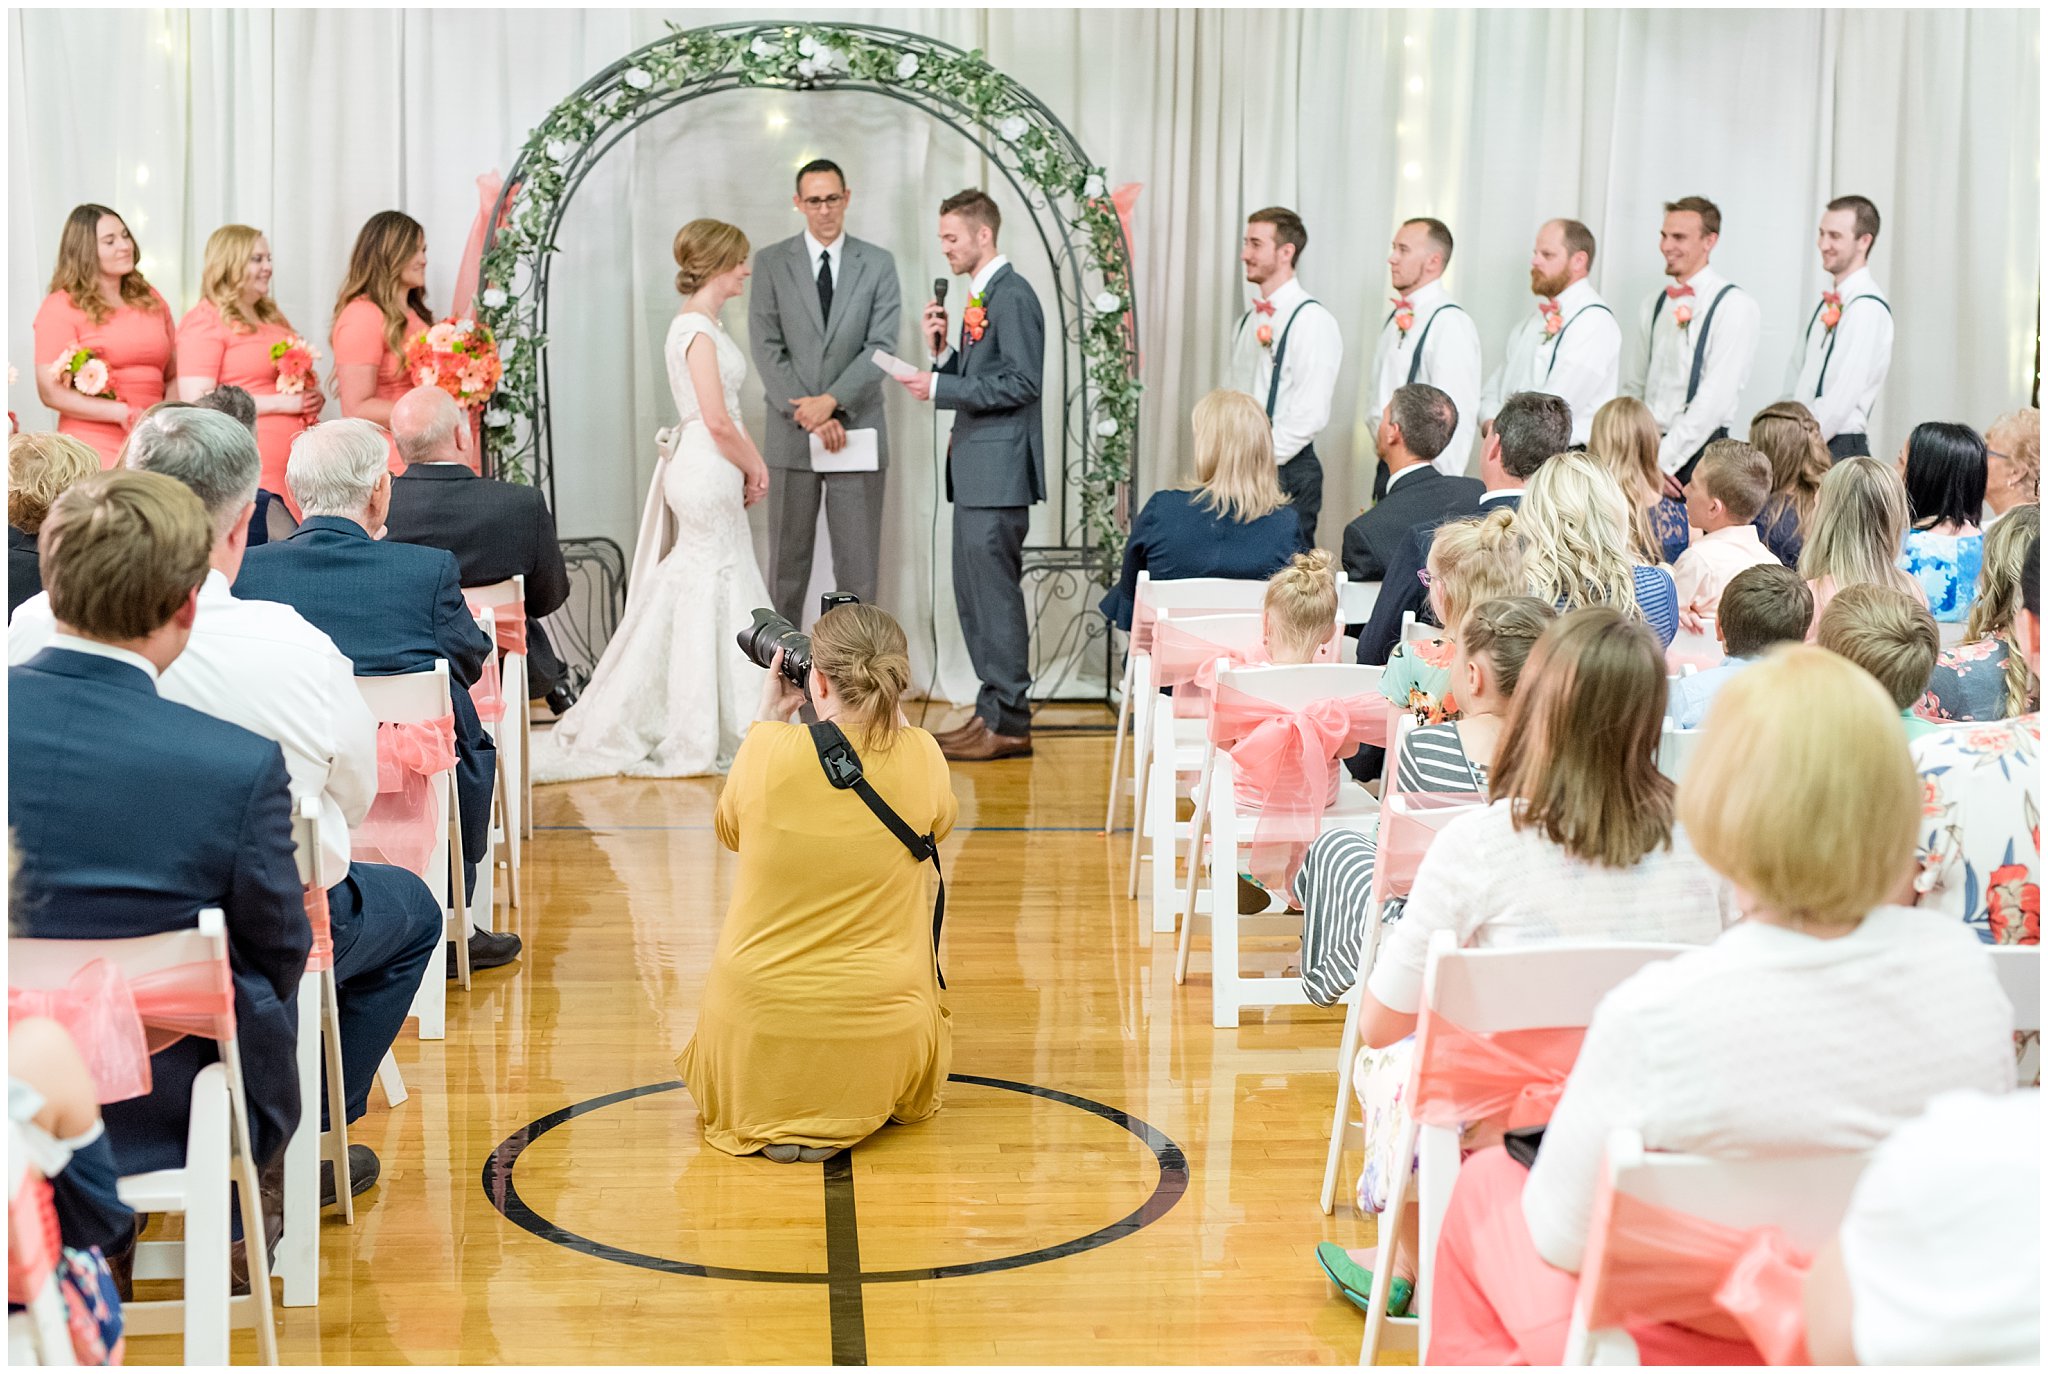 Utah Photographers at wedding at LDS church | Husband and Wife Photography Team | Jessie and Dallin Photography